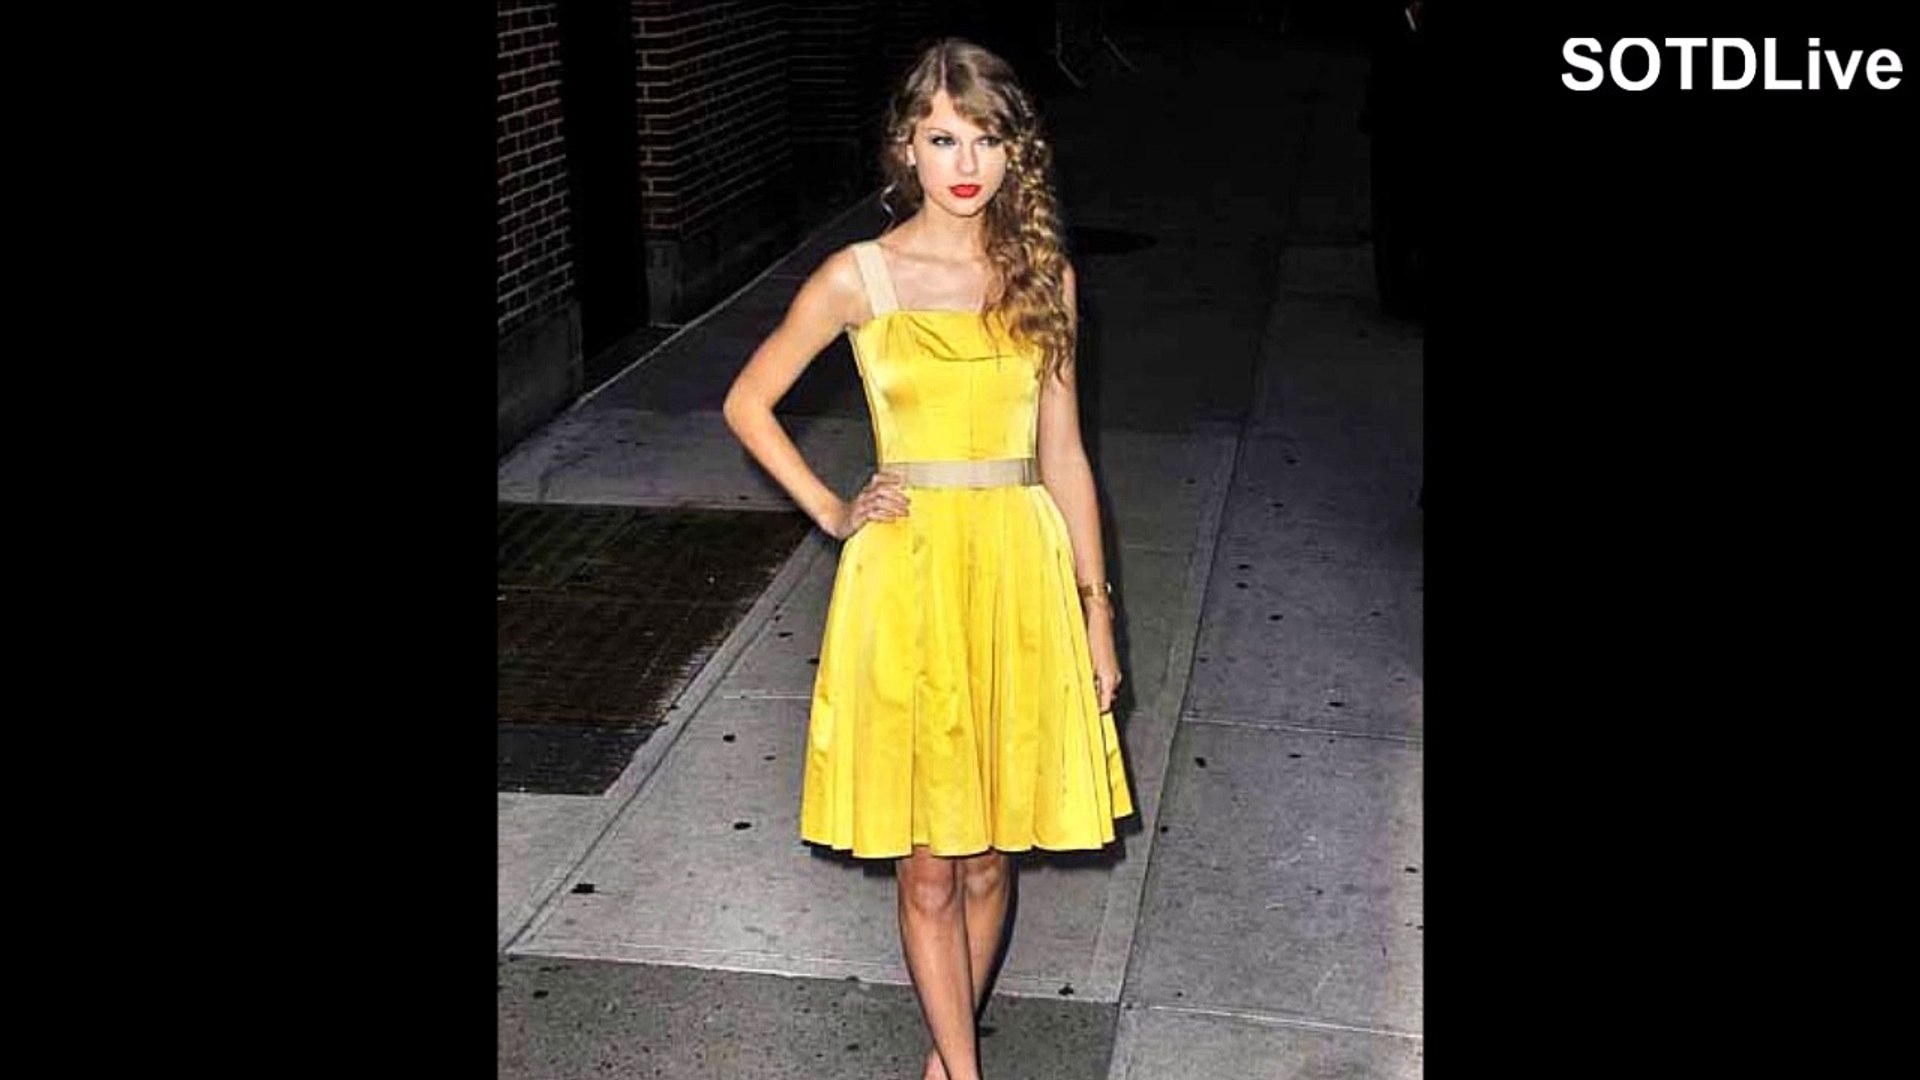 TAYLOR SWIFT looking ADORABLE in YELLOW MINI SKIRT | SOTDLive | Episode 7